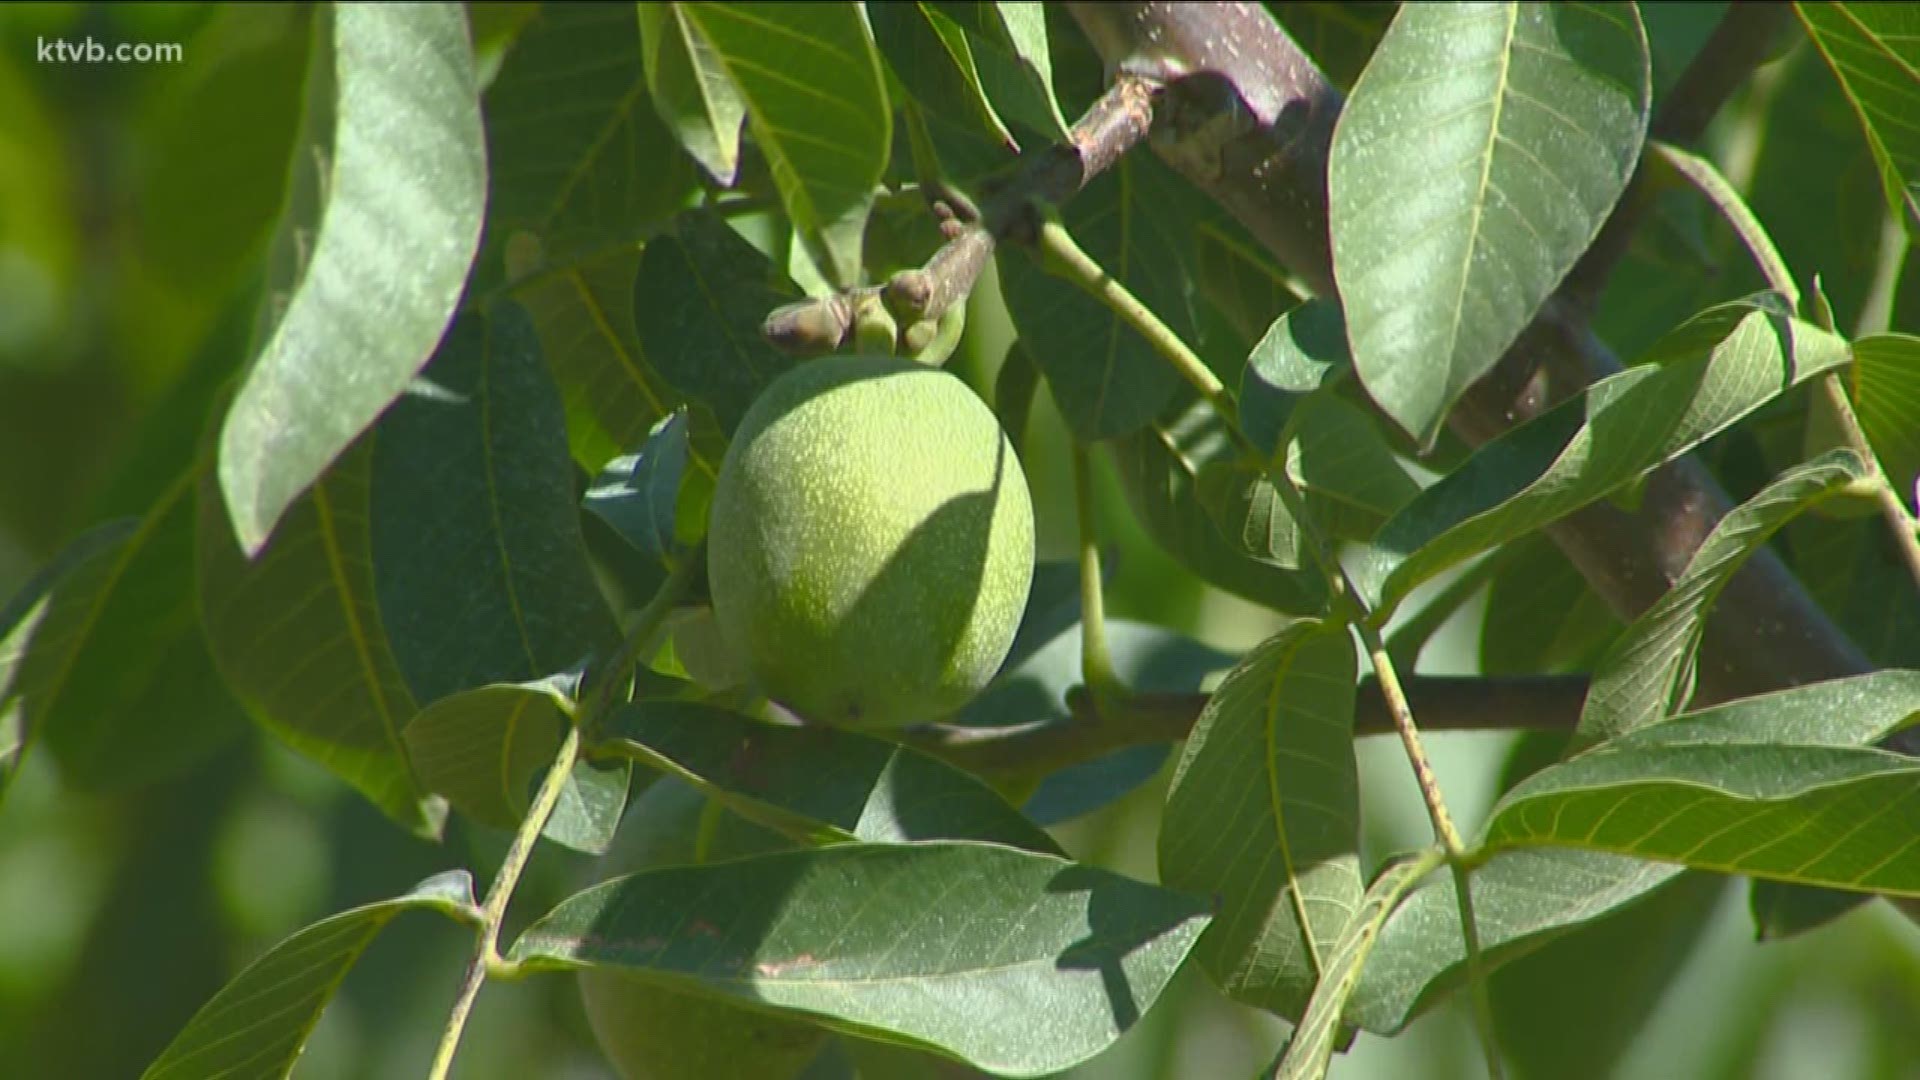 As Jim Duthie explains, Idaho's thriving fruit industry may soon be going nuts.